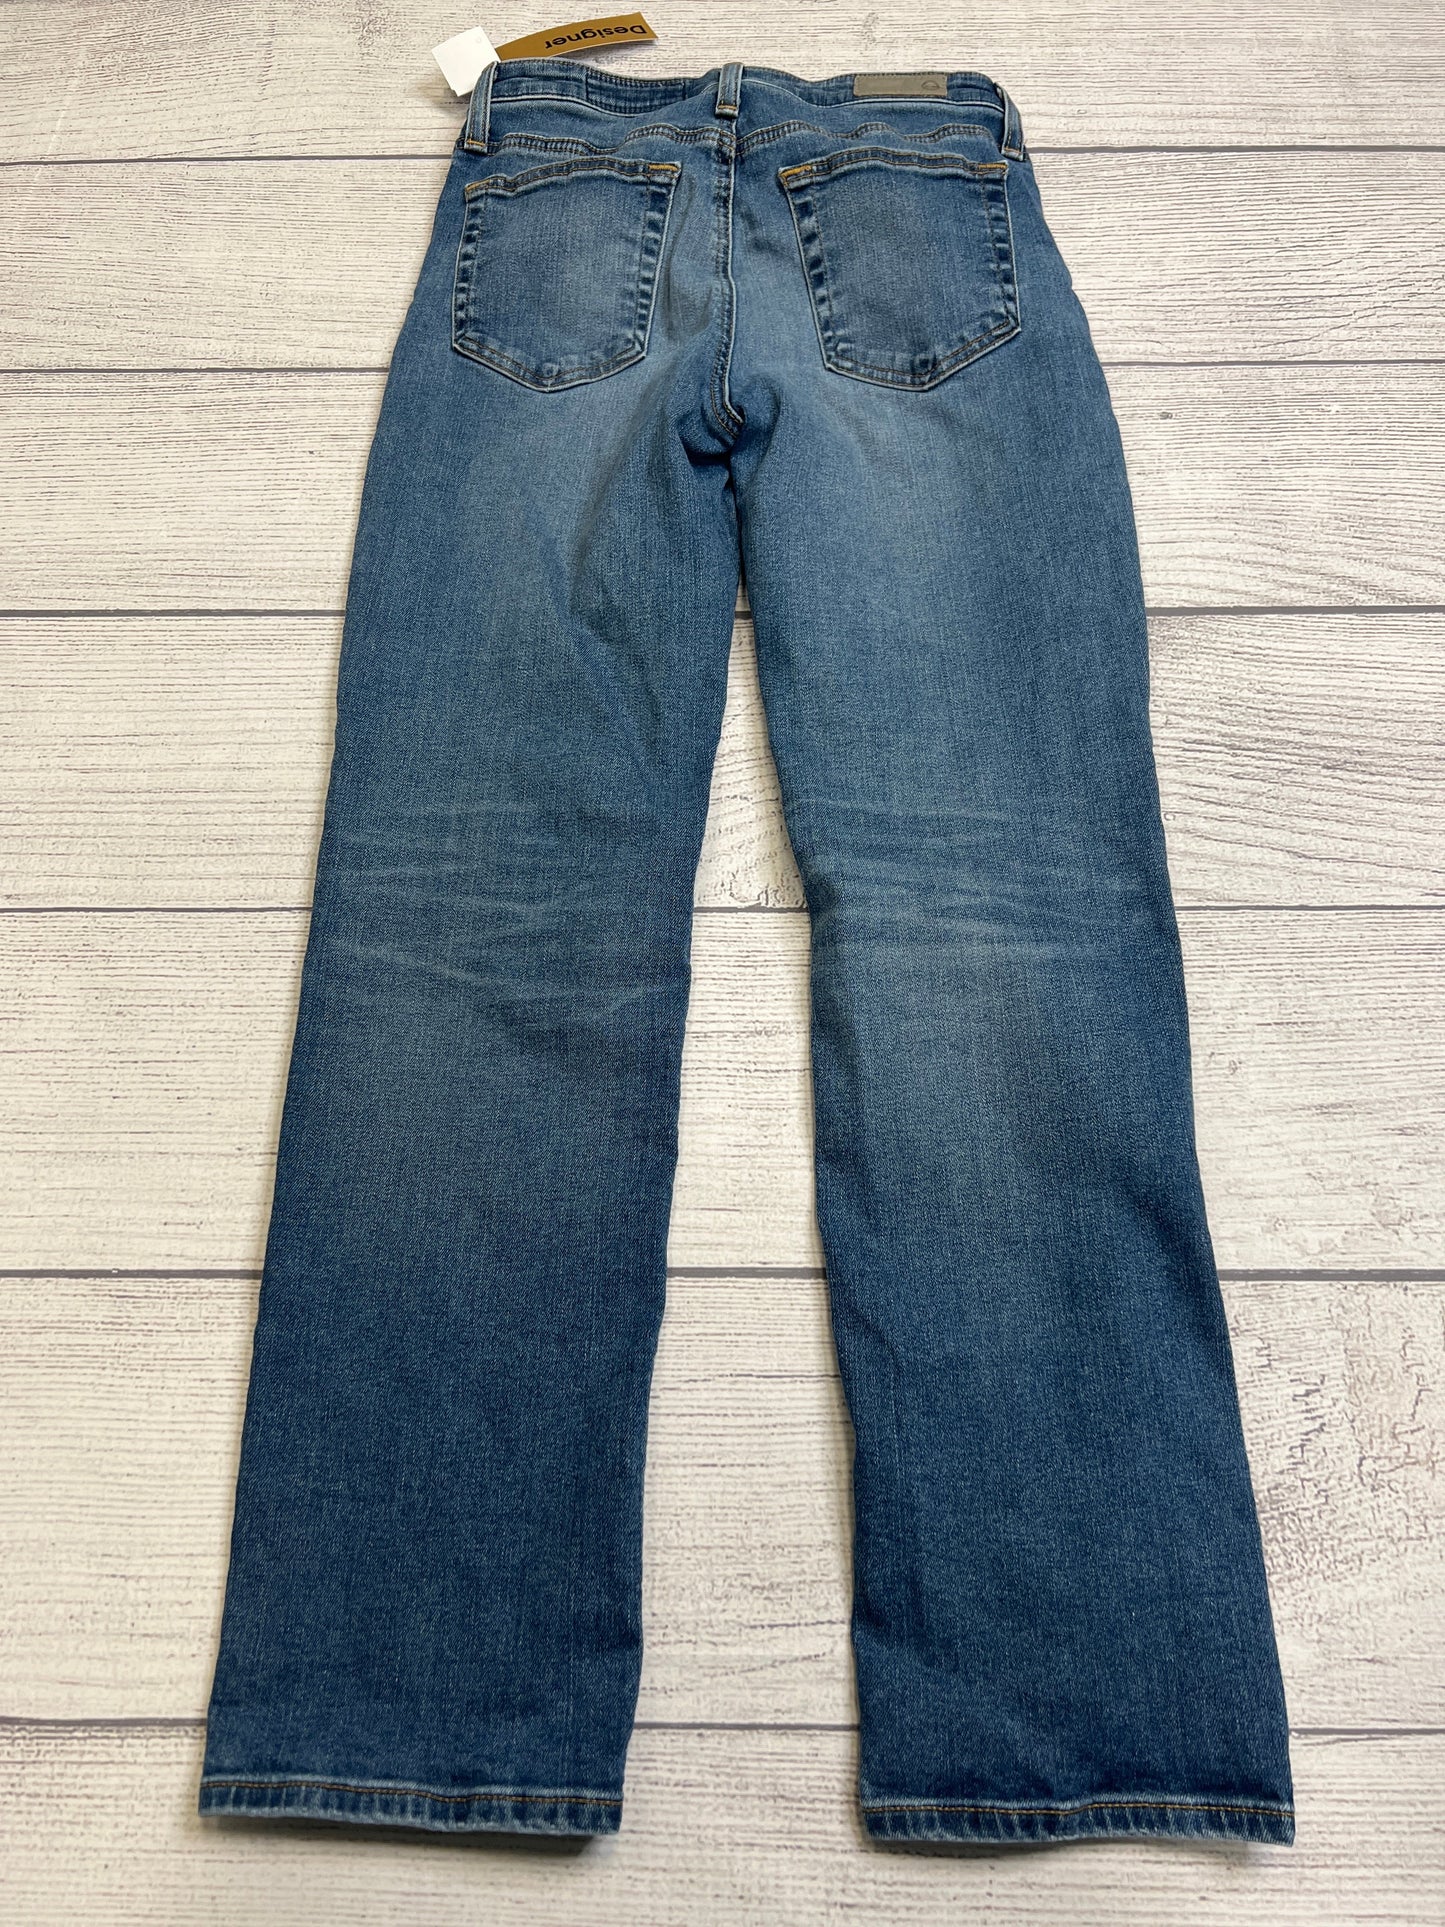 Jeans Designer By Adriano Goldschmied  Size: 2/26